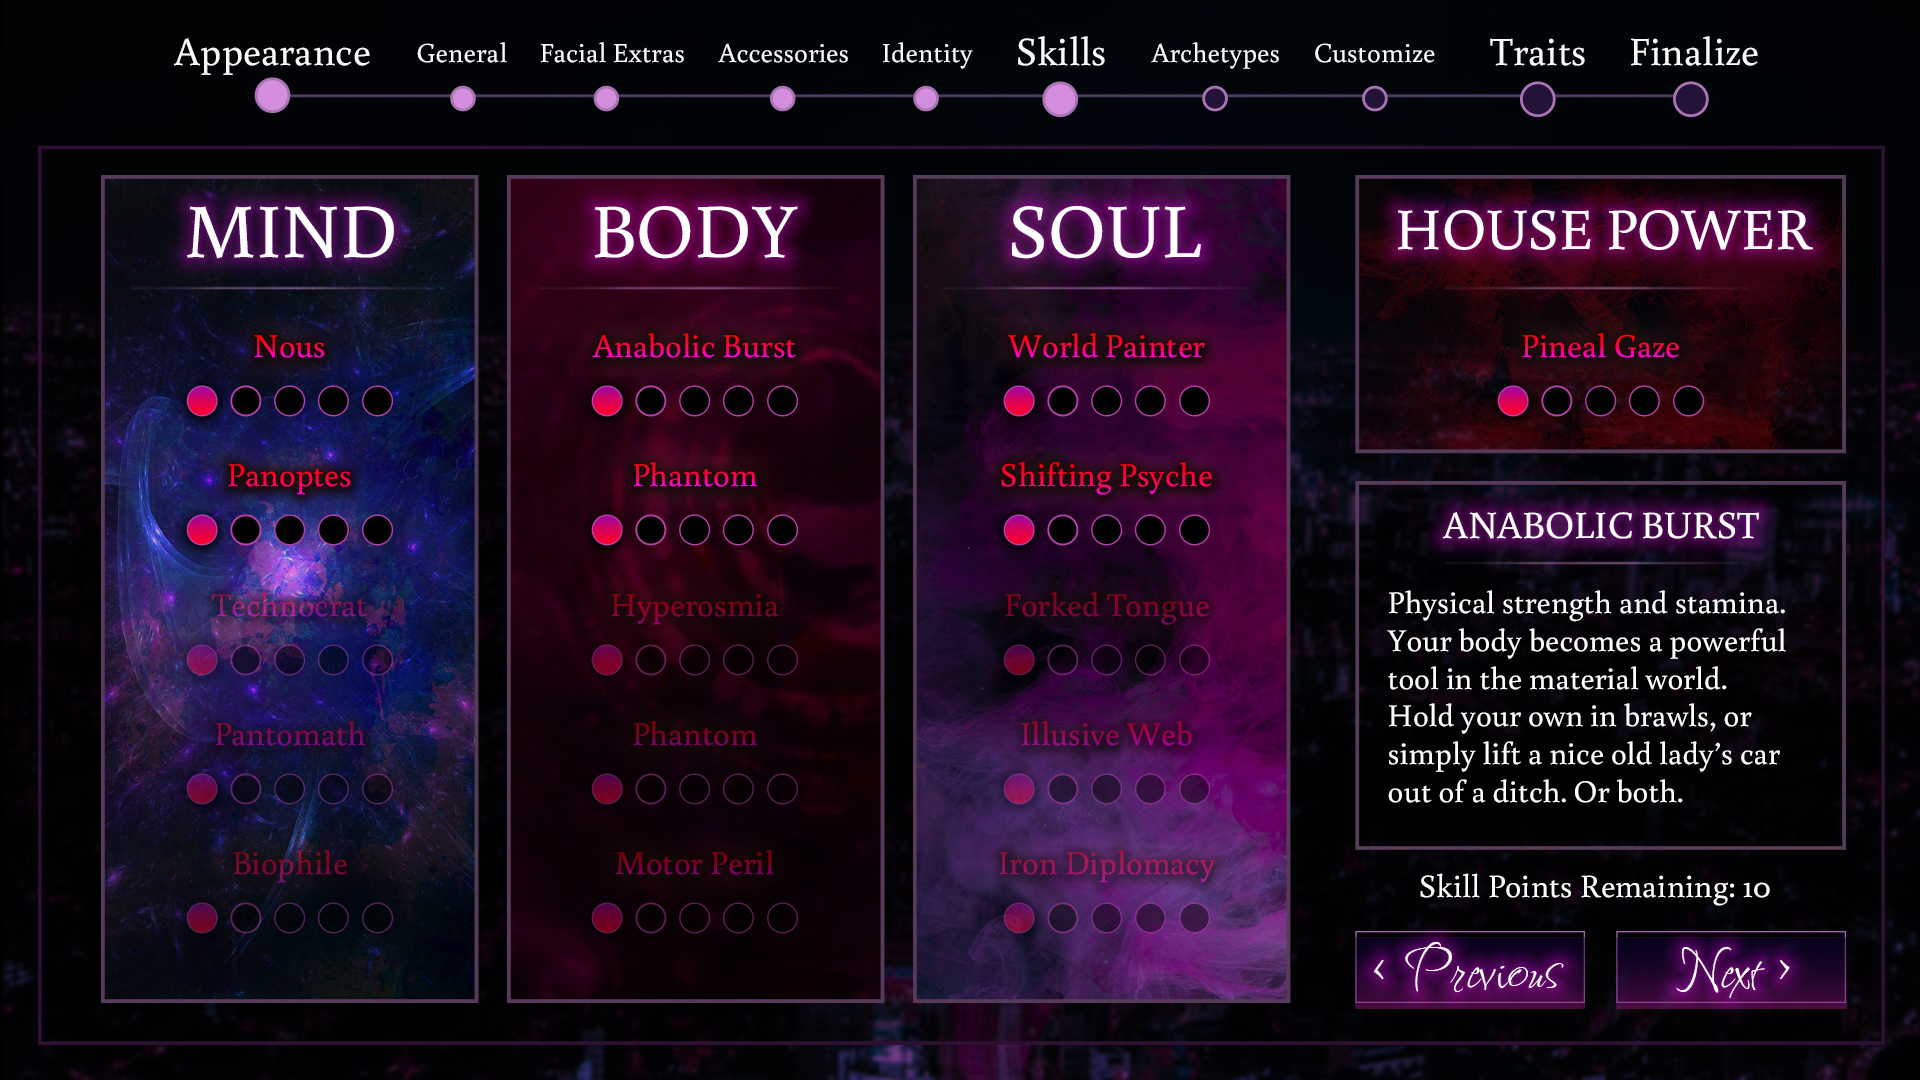 stats screen for skills in MIND, BODY, SOUL, and HOUSE POWER